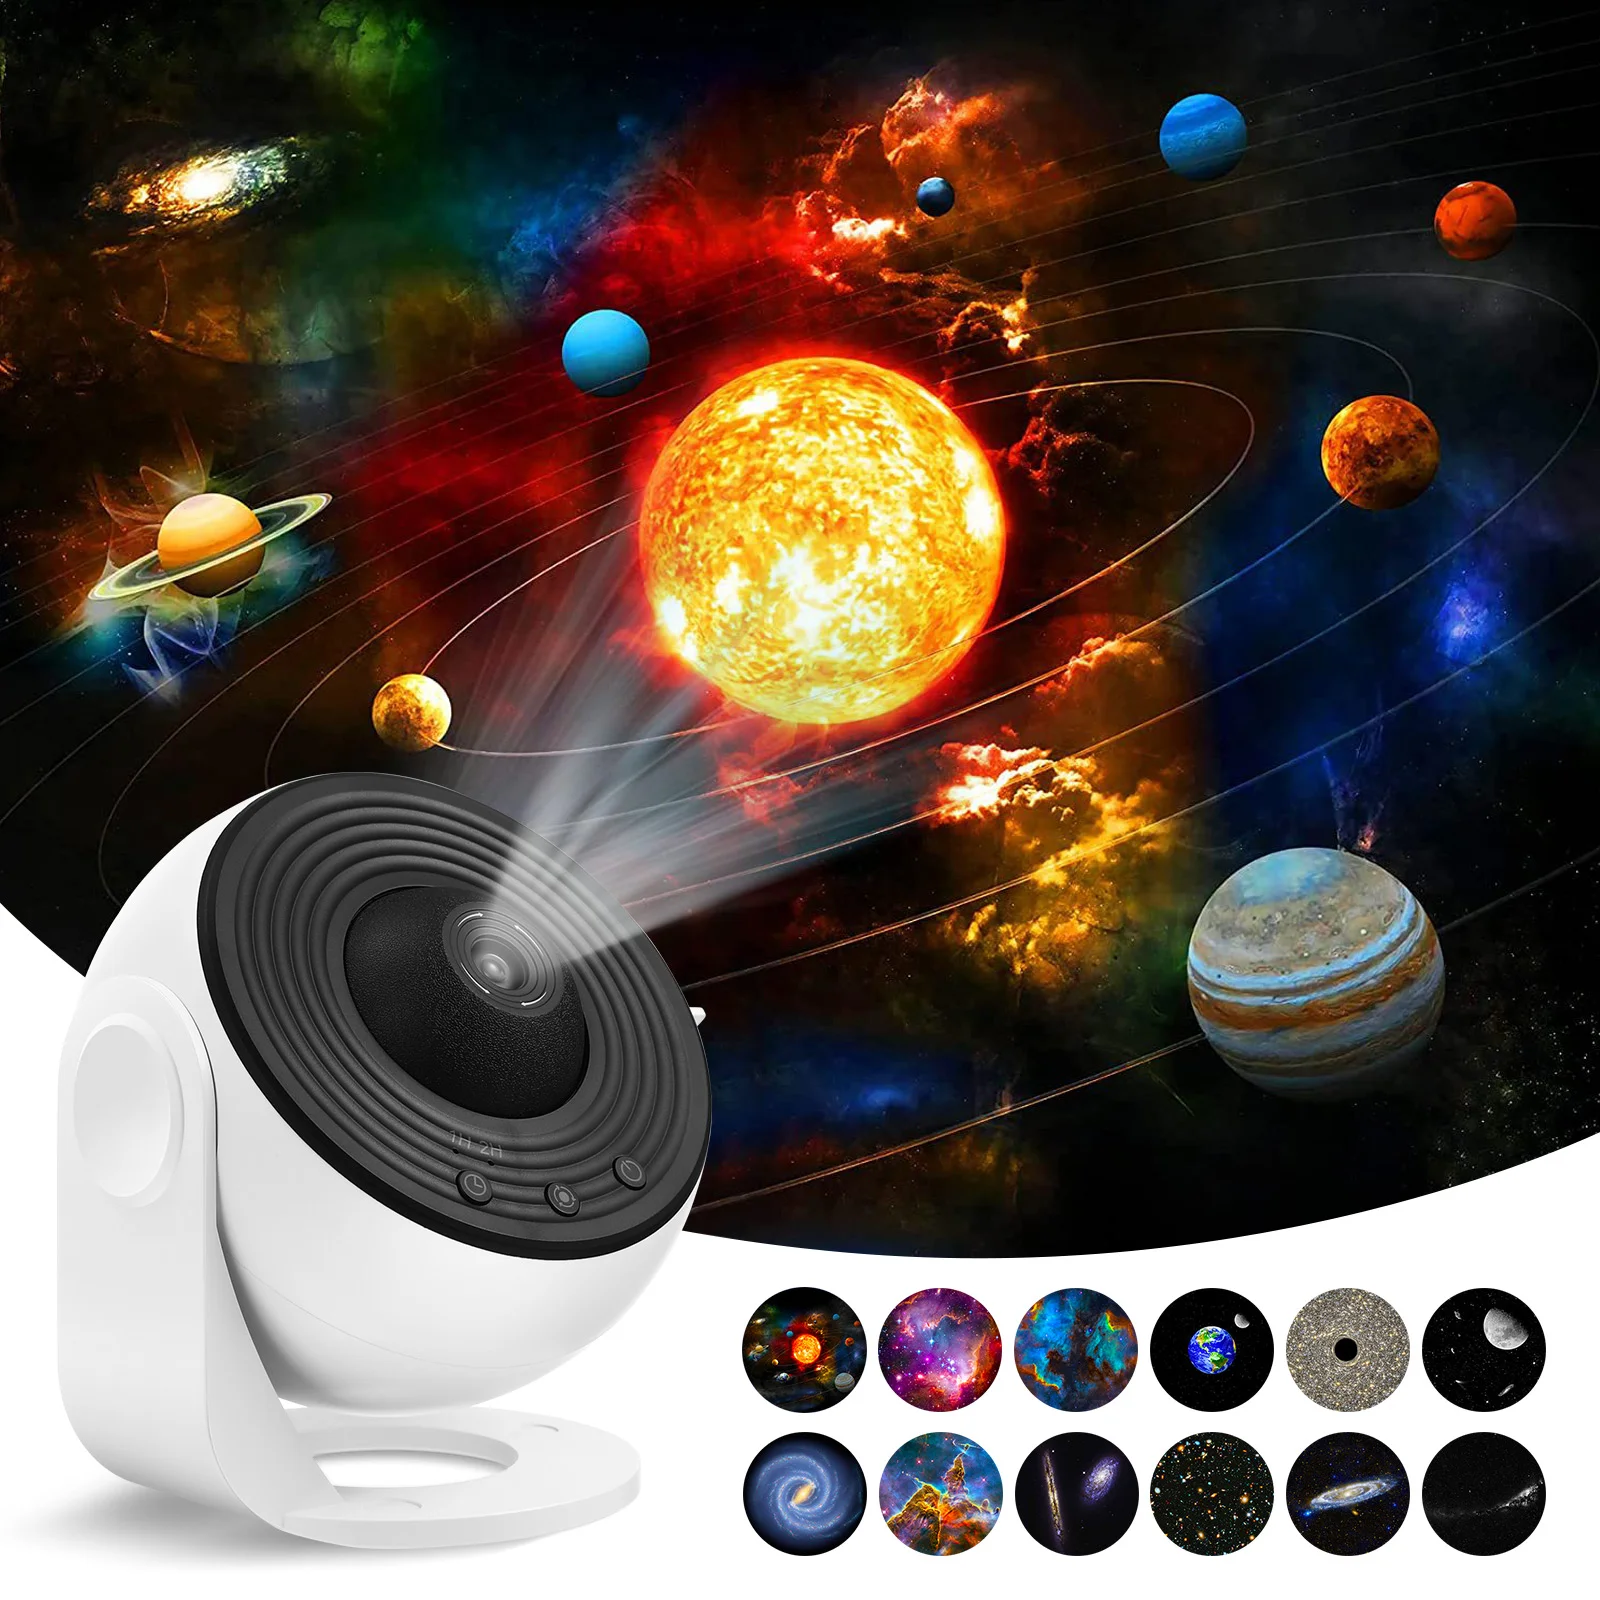 

USB Projector Night Star Light LED Film Discs Astronaut for Bedroom PC Abs Lights